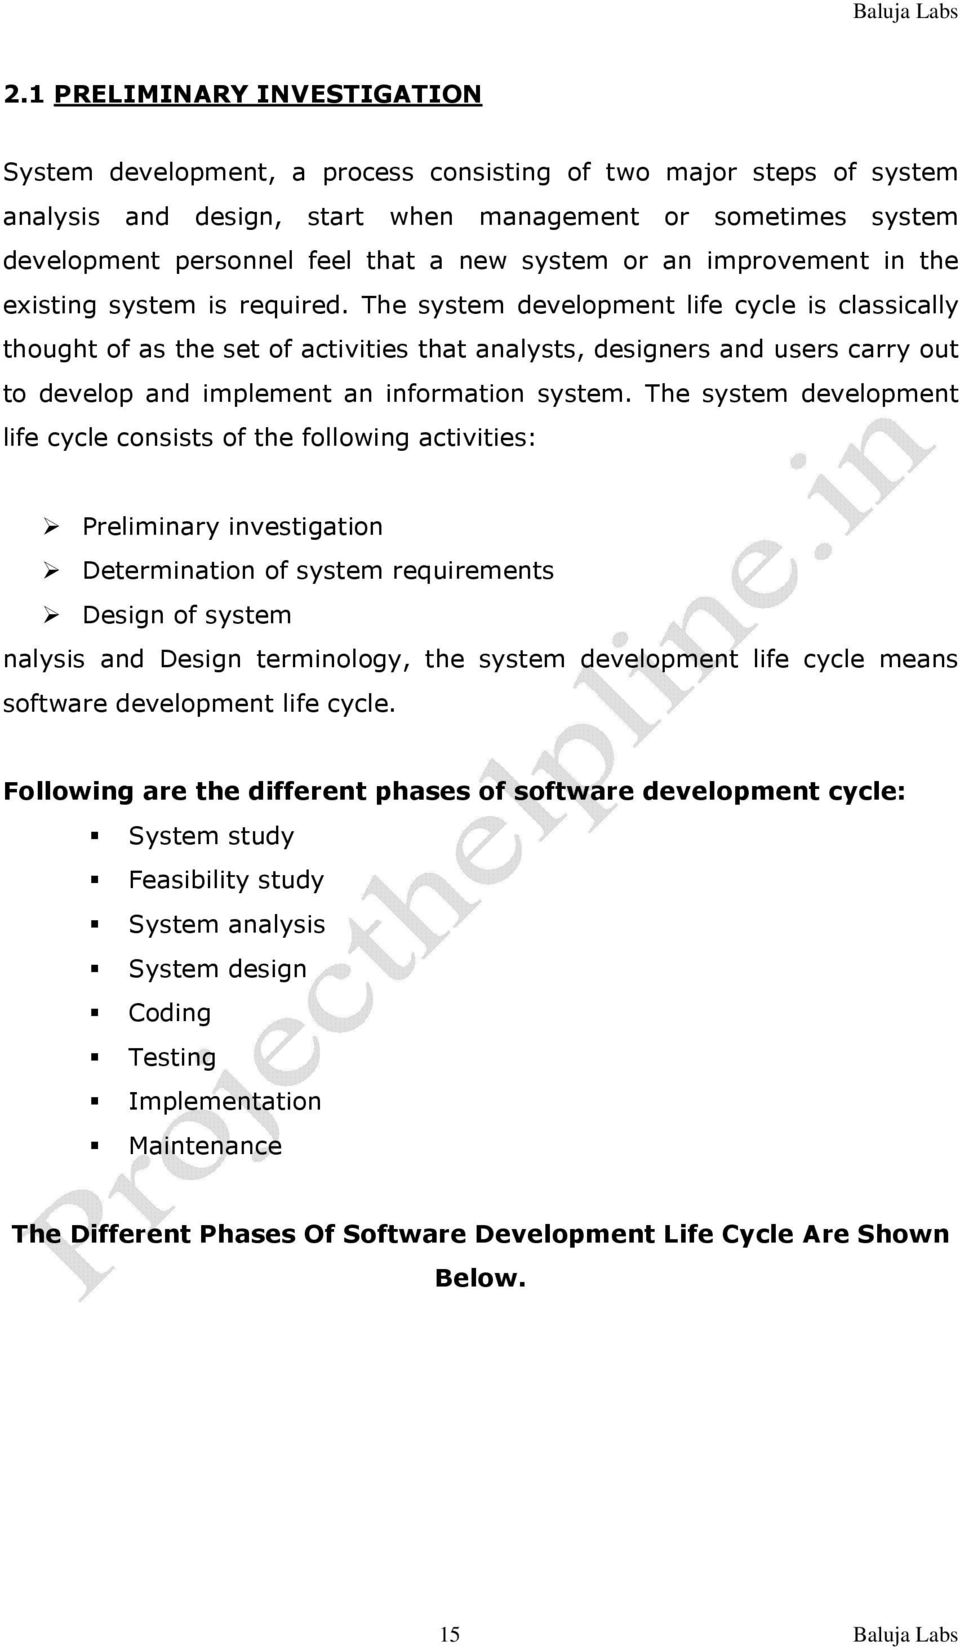 The system development life cycle is classically thought of as the set of activities that analysts, designers and users carry out to develop and implement an information system.